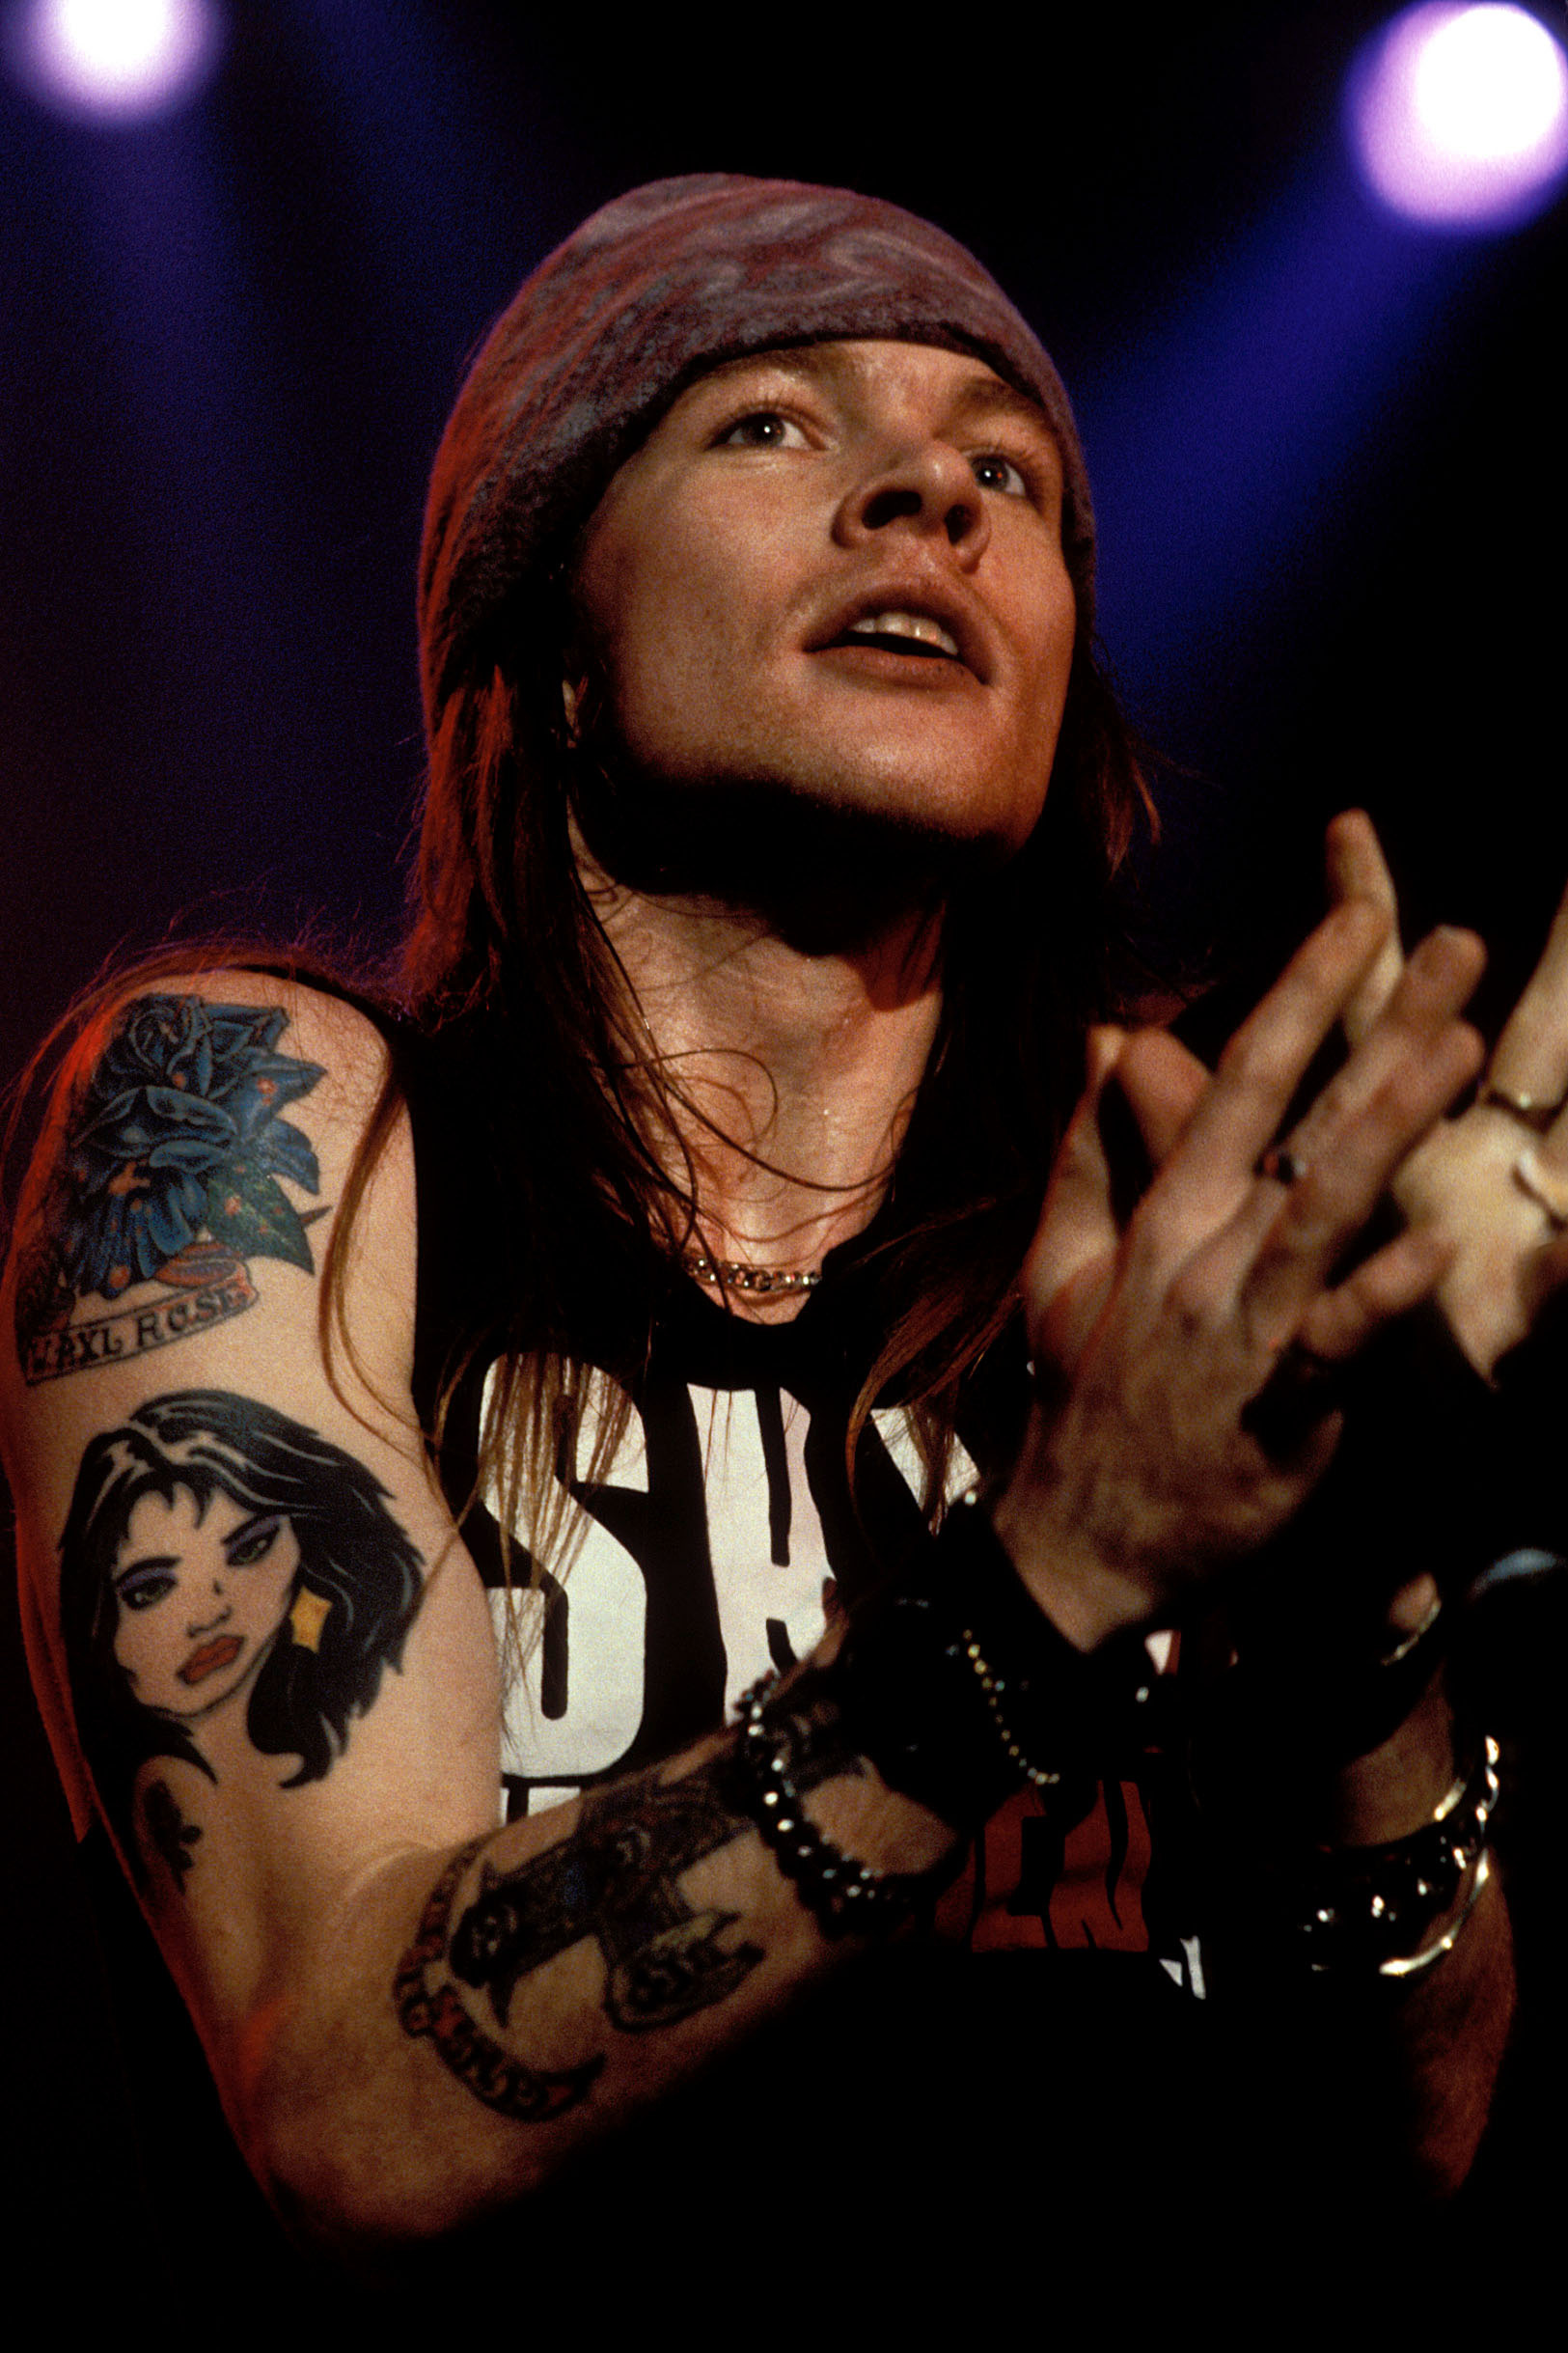 Axl Rose Wallpaper posted by Christopher Anderson 1630x2440